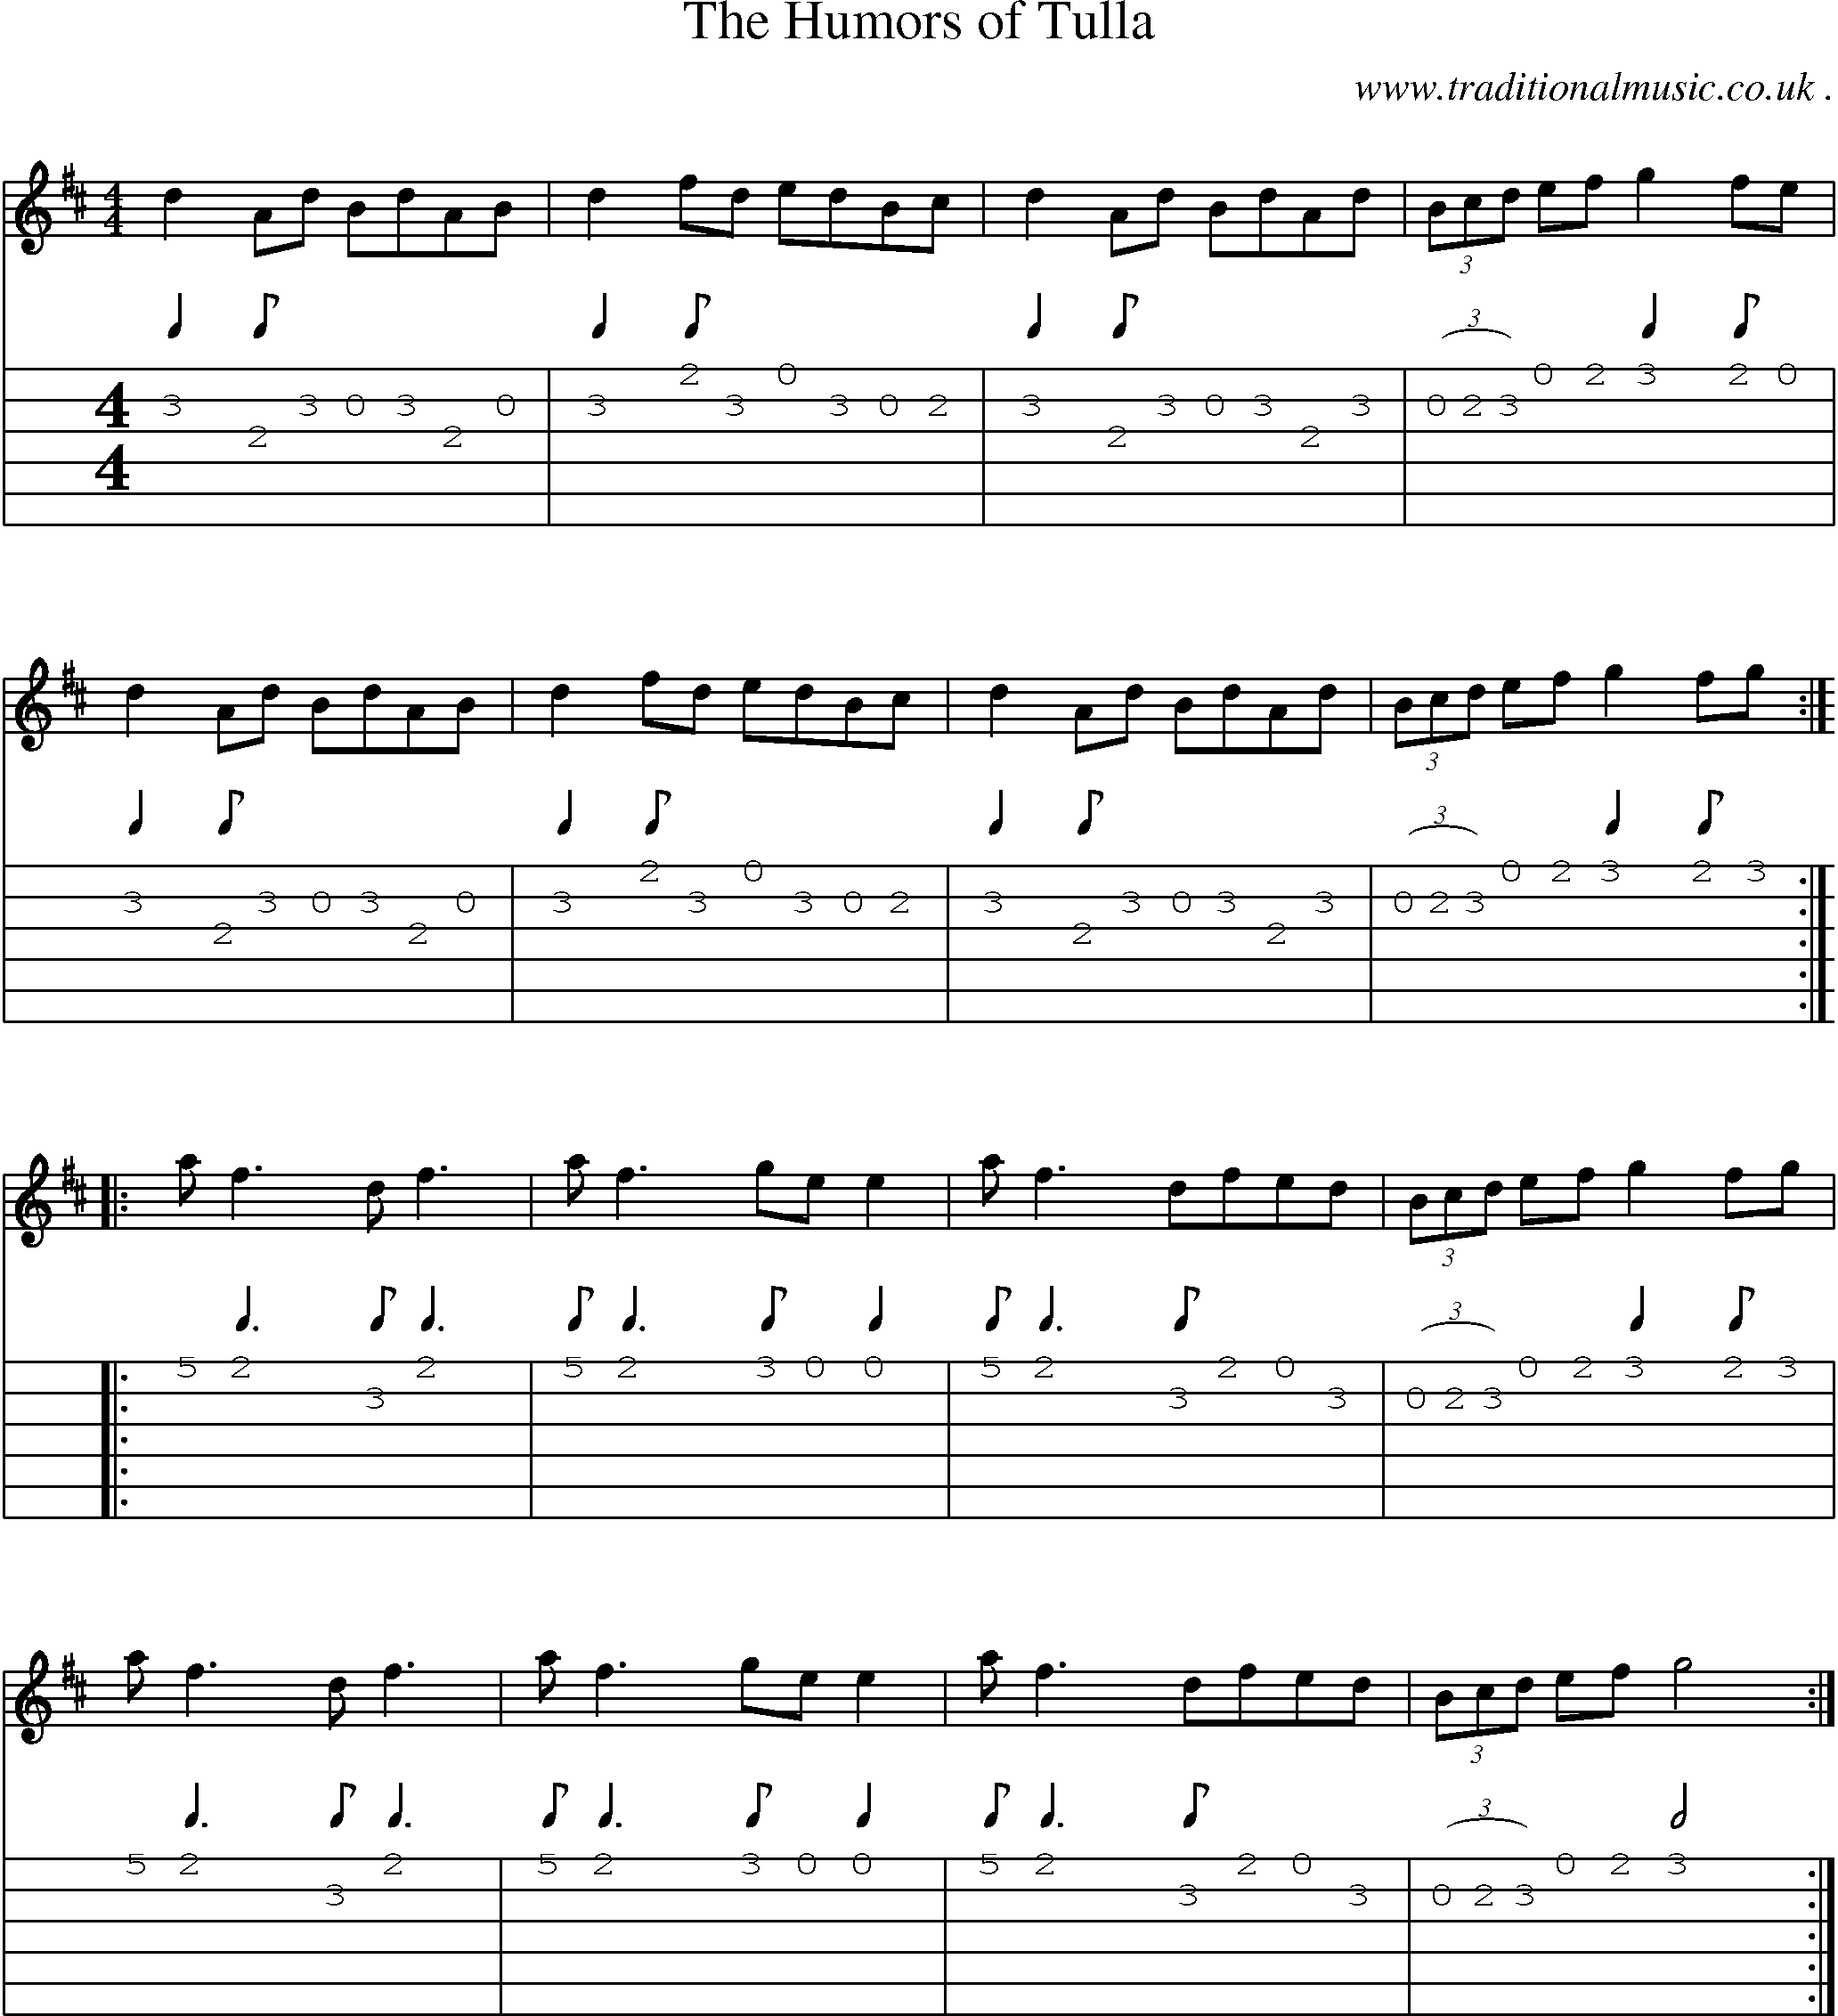 Sheet-Music and Guitar Tabs for The Humors Of Tulla